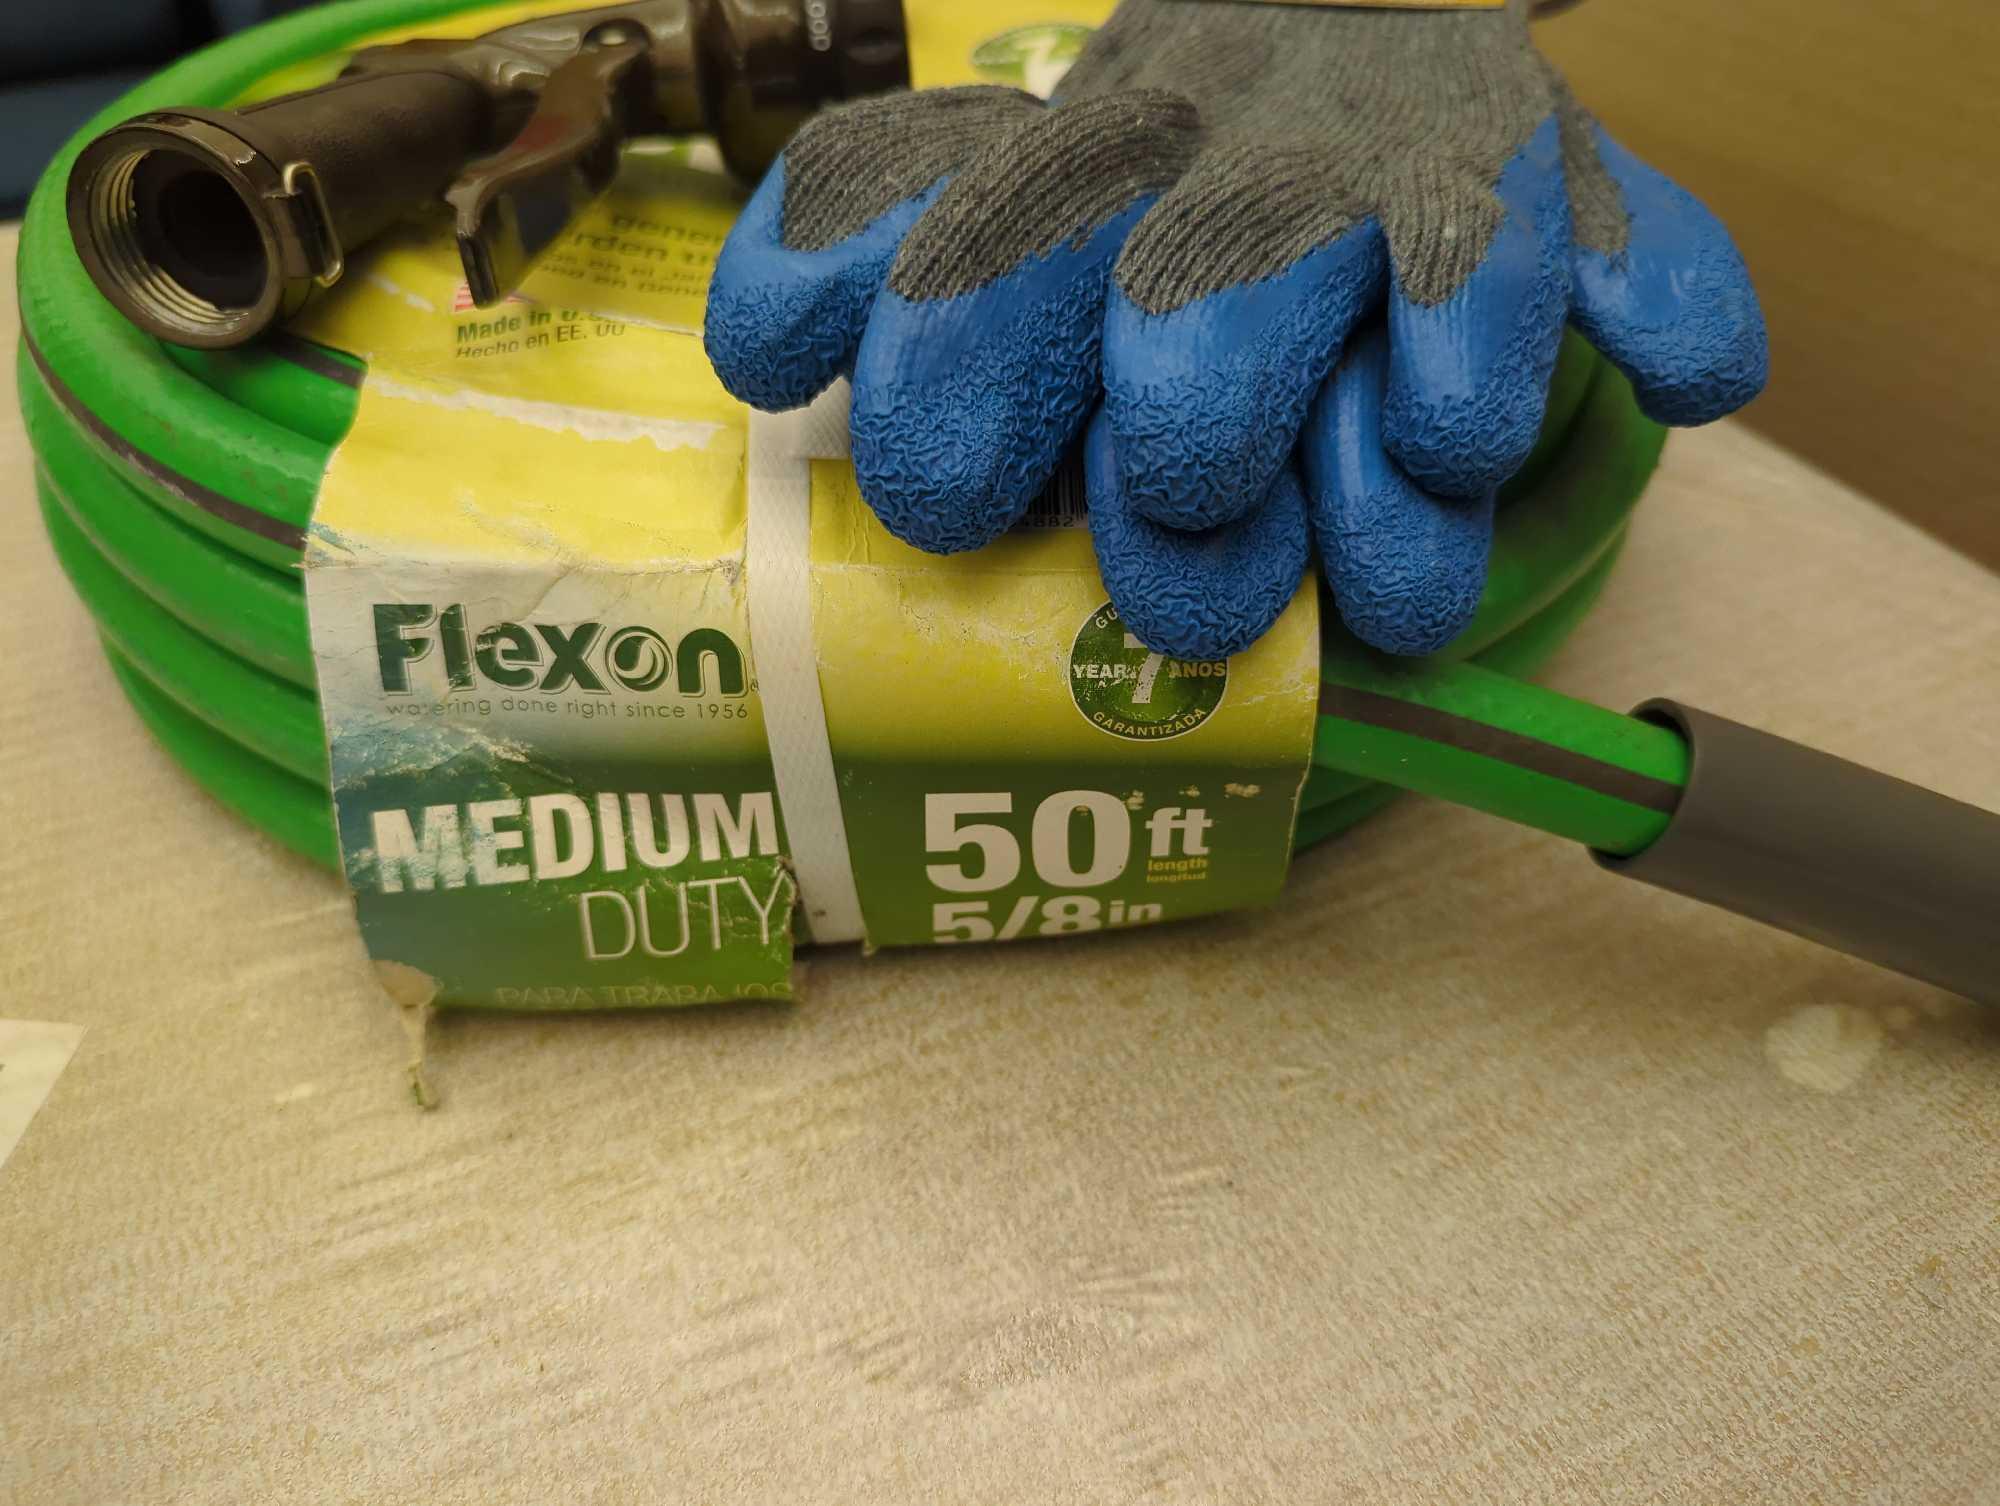 Lot of 3 Garden Items to Include, FIRM GRIP Large Latex Coated Work Gloves New, Flexon 5/8 in. Dia x